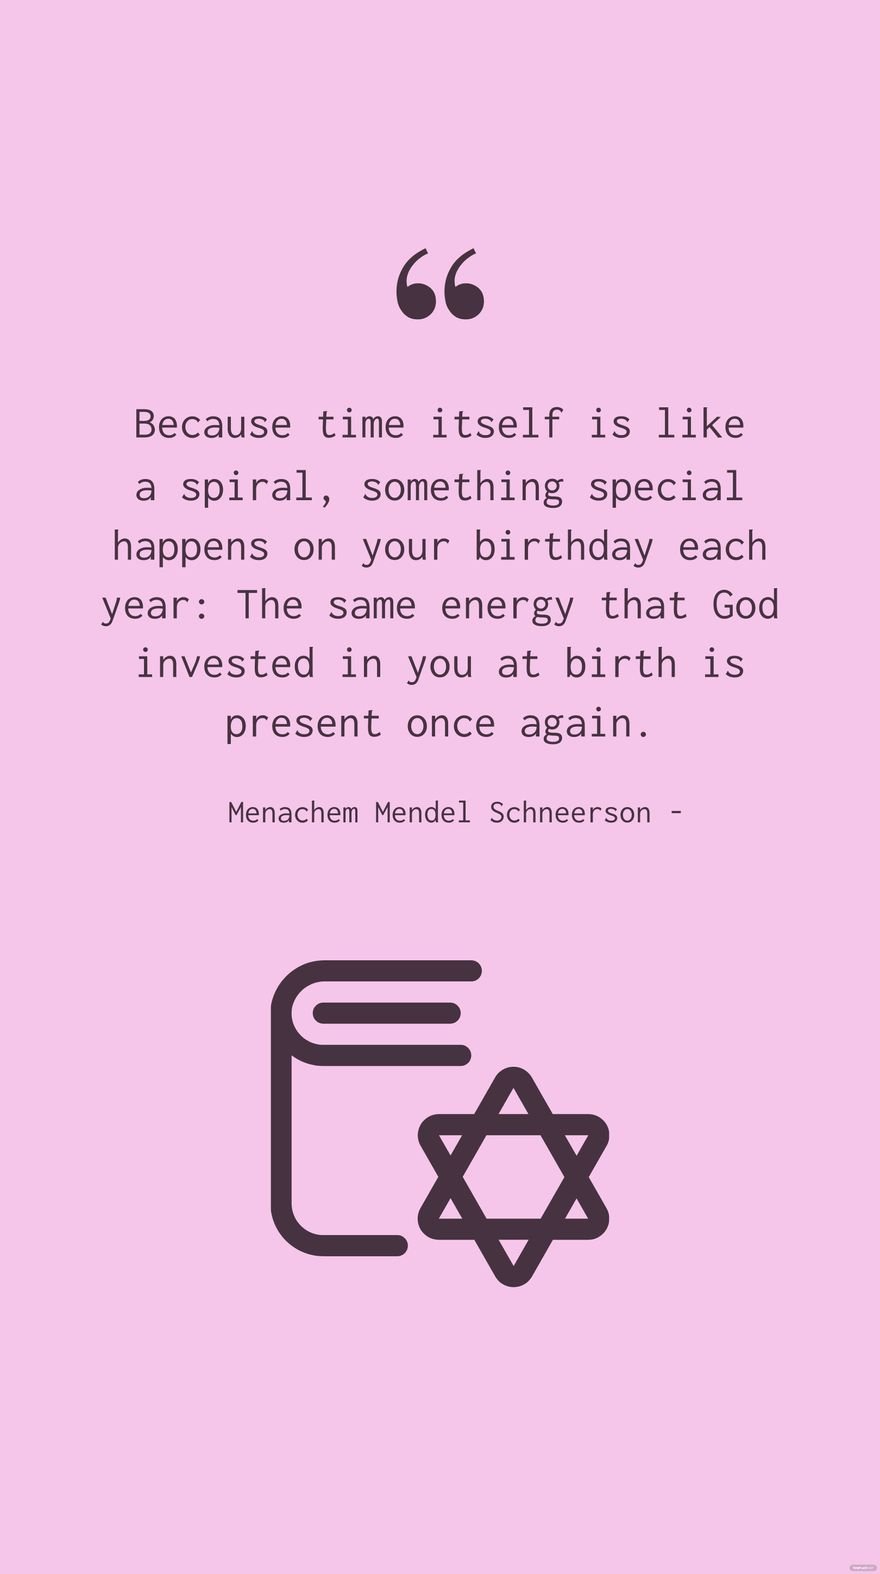 Menachem Mendel Schneerson - Because time itself is like a spiral, something special happens on your birthday each year: The same energy that God invested in you at birth is present once again.